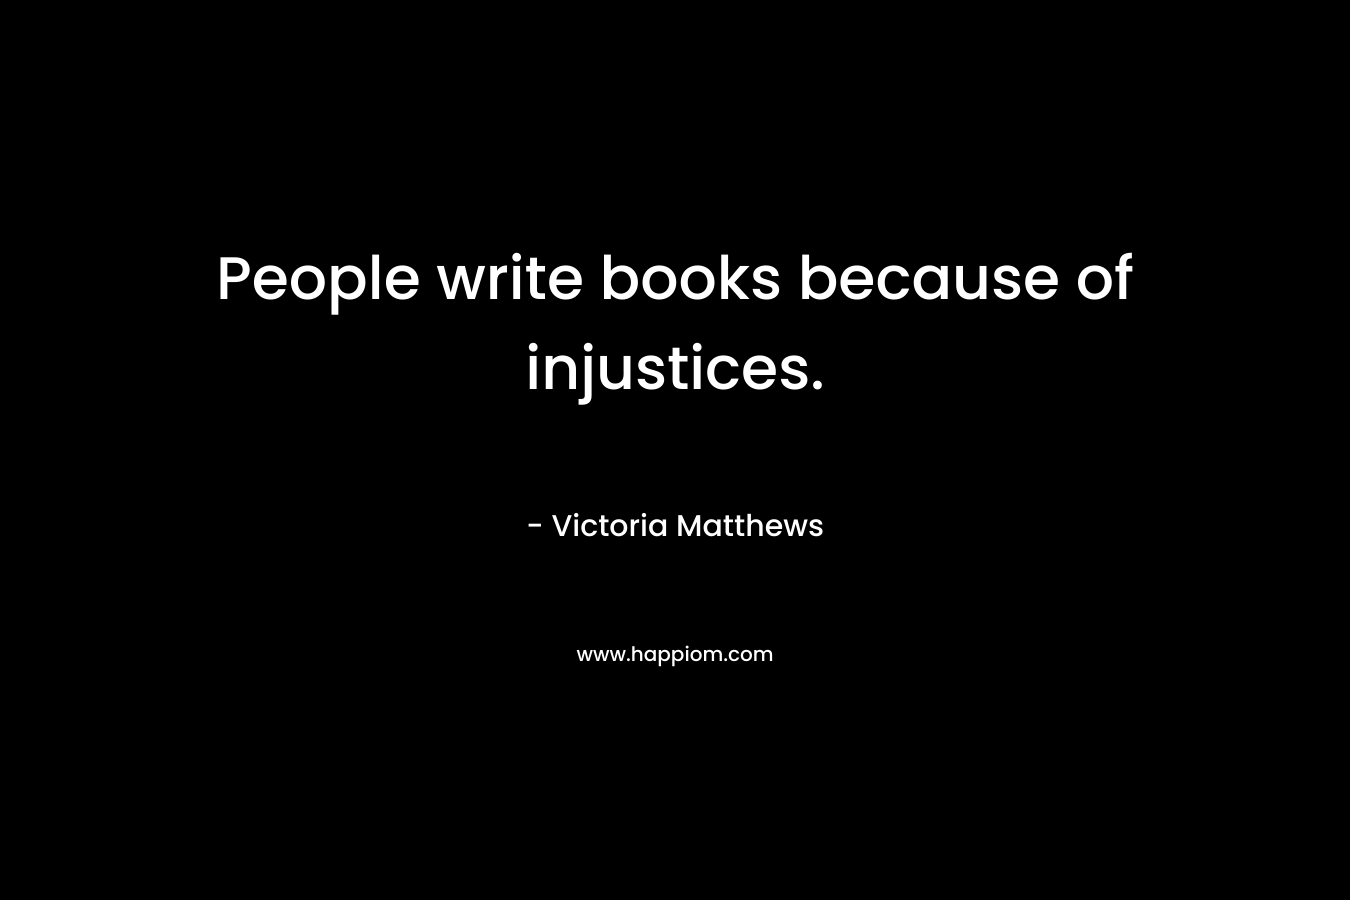 People write books because of injustices. – Victoria Matthews